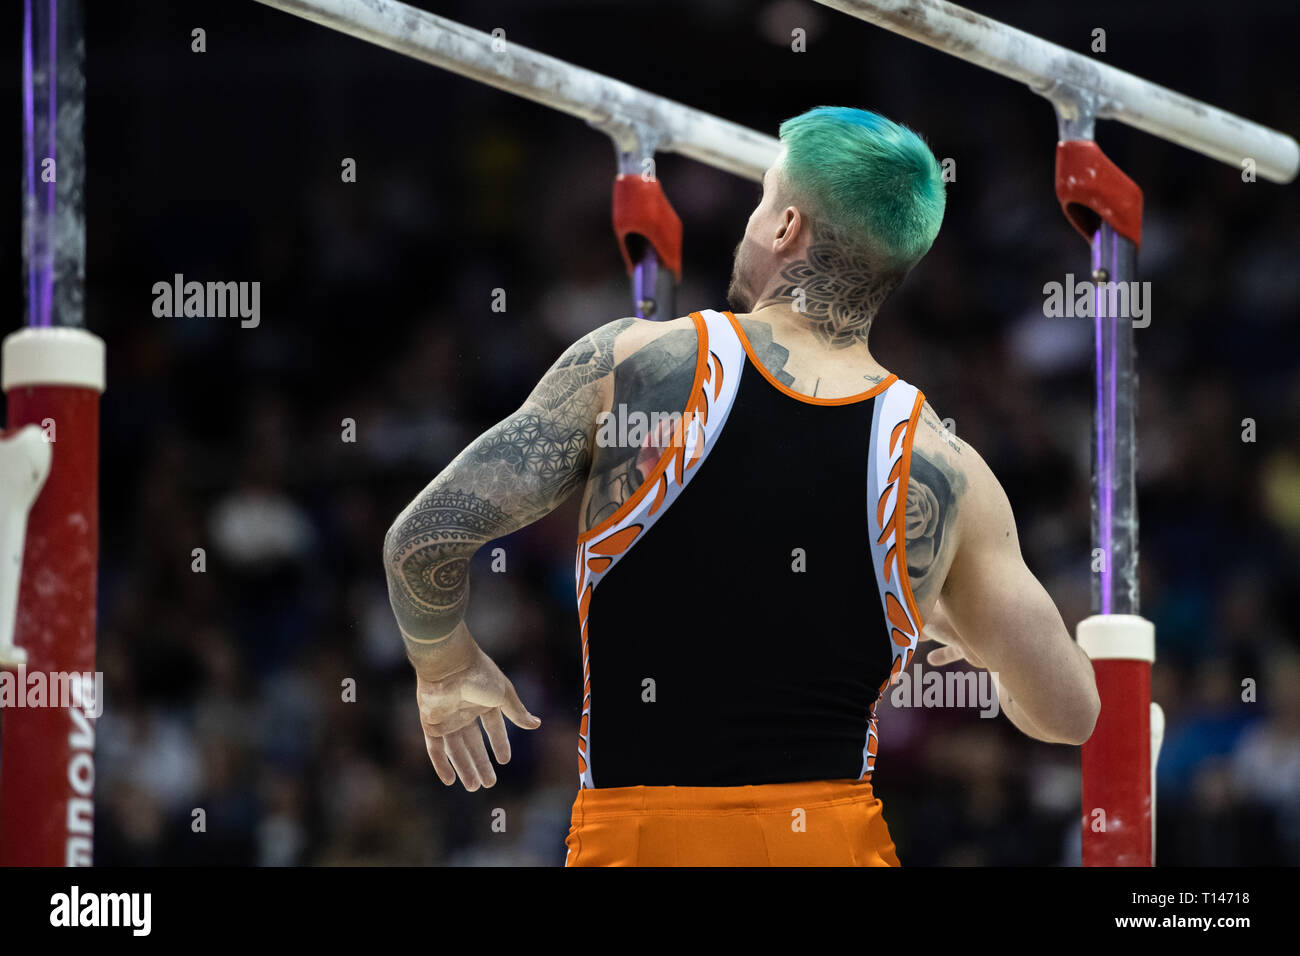 London, UK. 23rd March, 2019. Casimir Schmidt performs on the Parallel Bars during the Matchroom Multisport presents the 2019 Superstars of Gymnastics at The O2 Arena on Saturday, 23 March 2019. LONDON ENGLAND. Credit: Taka G Wu/Alamy News Stock Photo